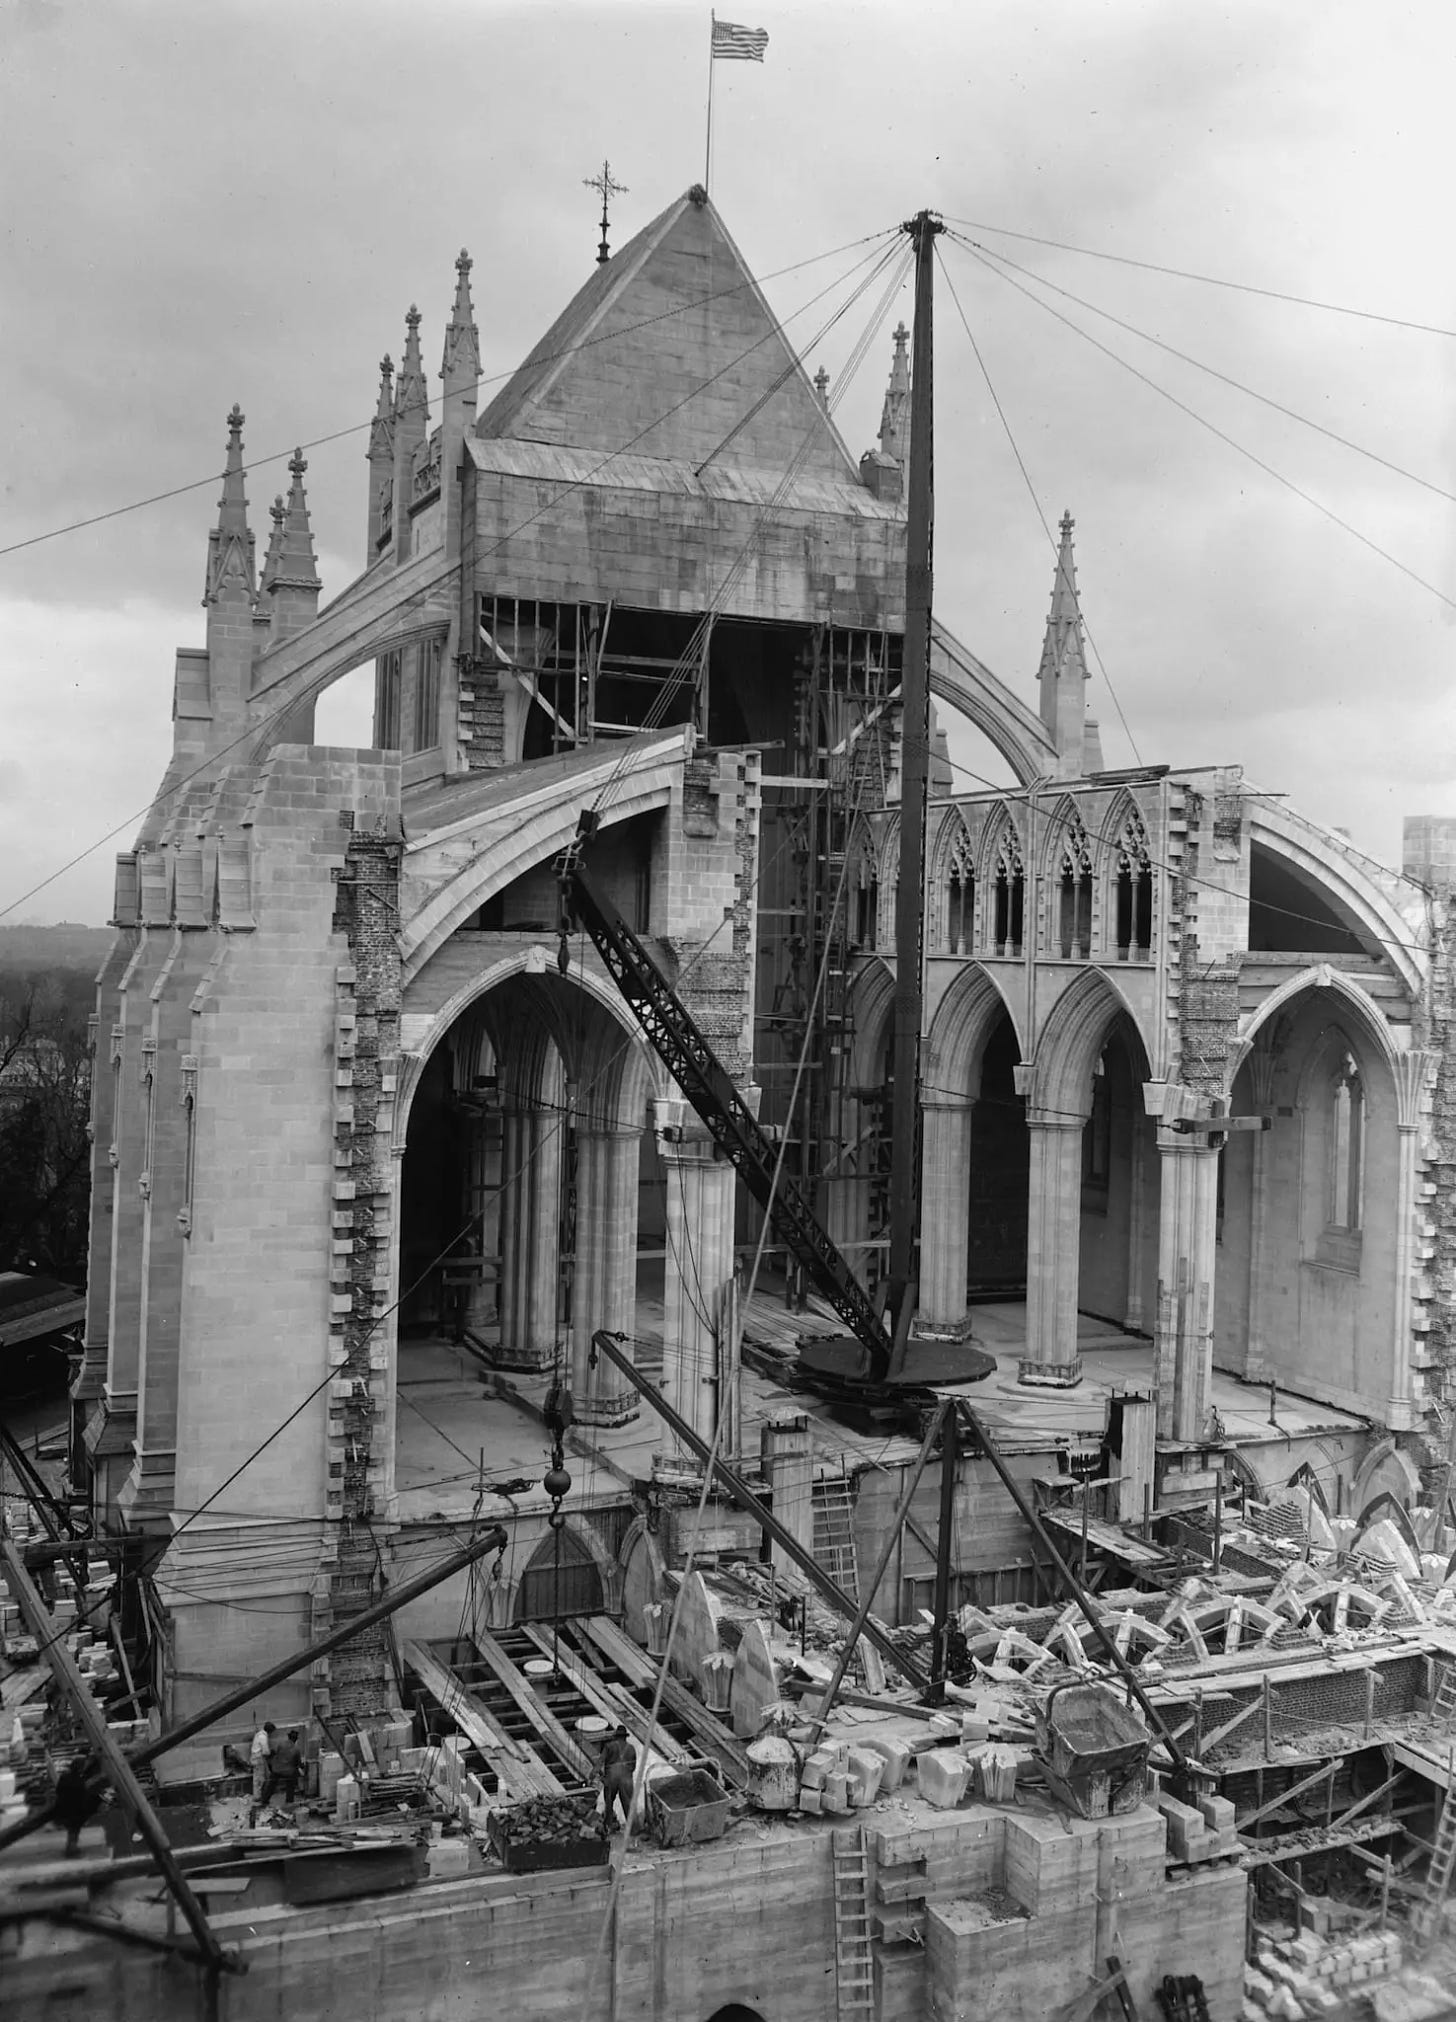 A Unique Look at the National Cathedral Under Construction in 1925